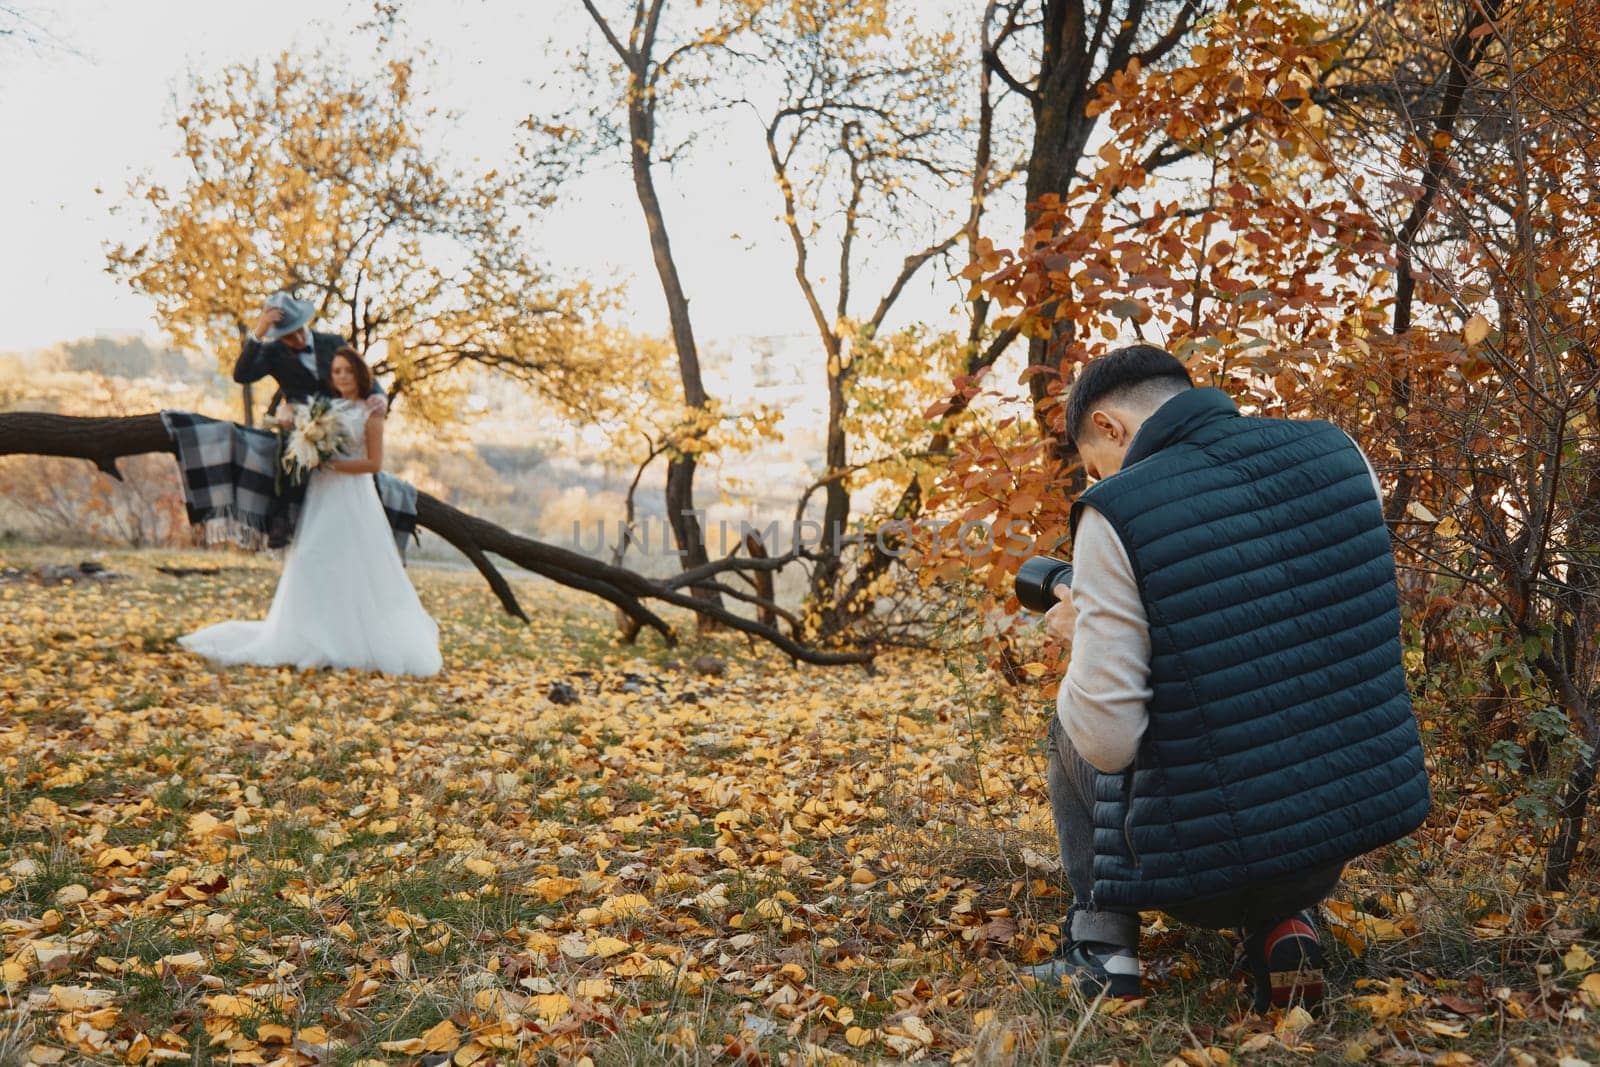 male wedding photographer taking pictures of the bride and groom outdoor in autumn